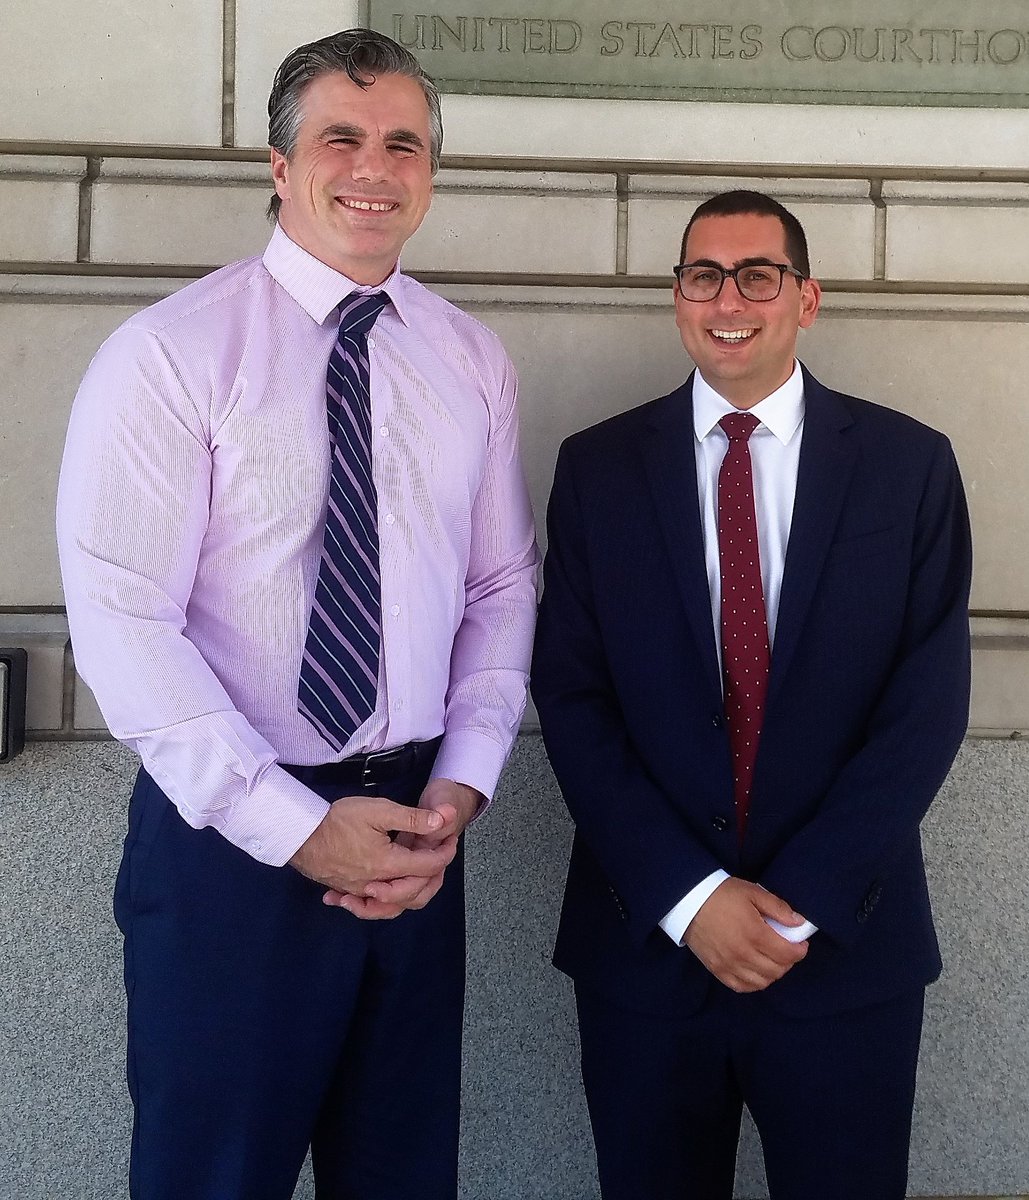 HAPPENING NOW: Federal Appeals Court Hearing in Civil Rights Lawsuit for Teacher Fired for Conservative Social Media Posts Objecting to Woke Racial Theories in Schools. @JudicialWatch senior attorney Michael Bekesha will be arguing before the court. judicialwatch.org/federal-appeal…